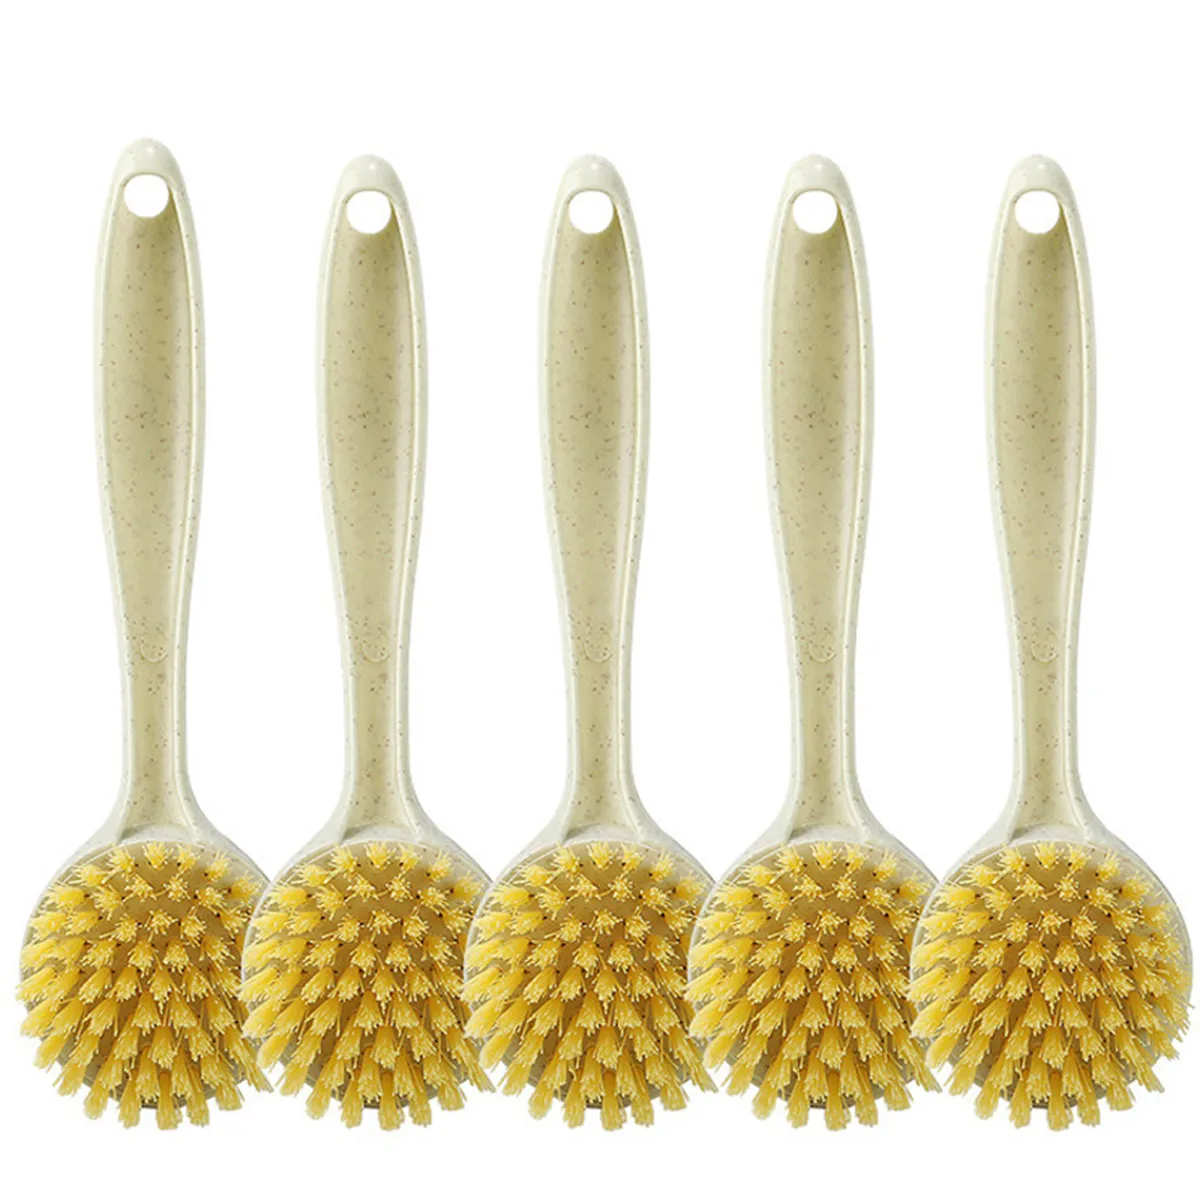 Set Of 5 Pot Scrubbing Brushes, Non-Scratch Cleaning Brushes For Pots, Dishes, Sinks, And Stovetops